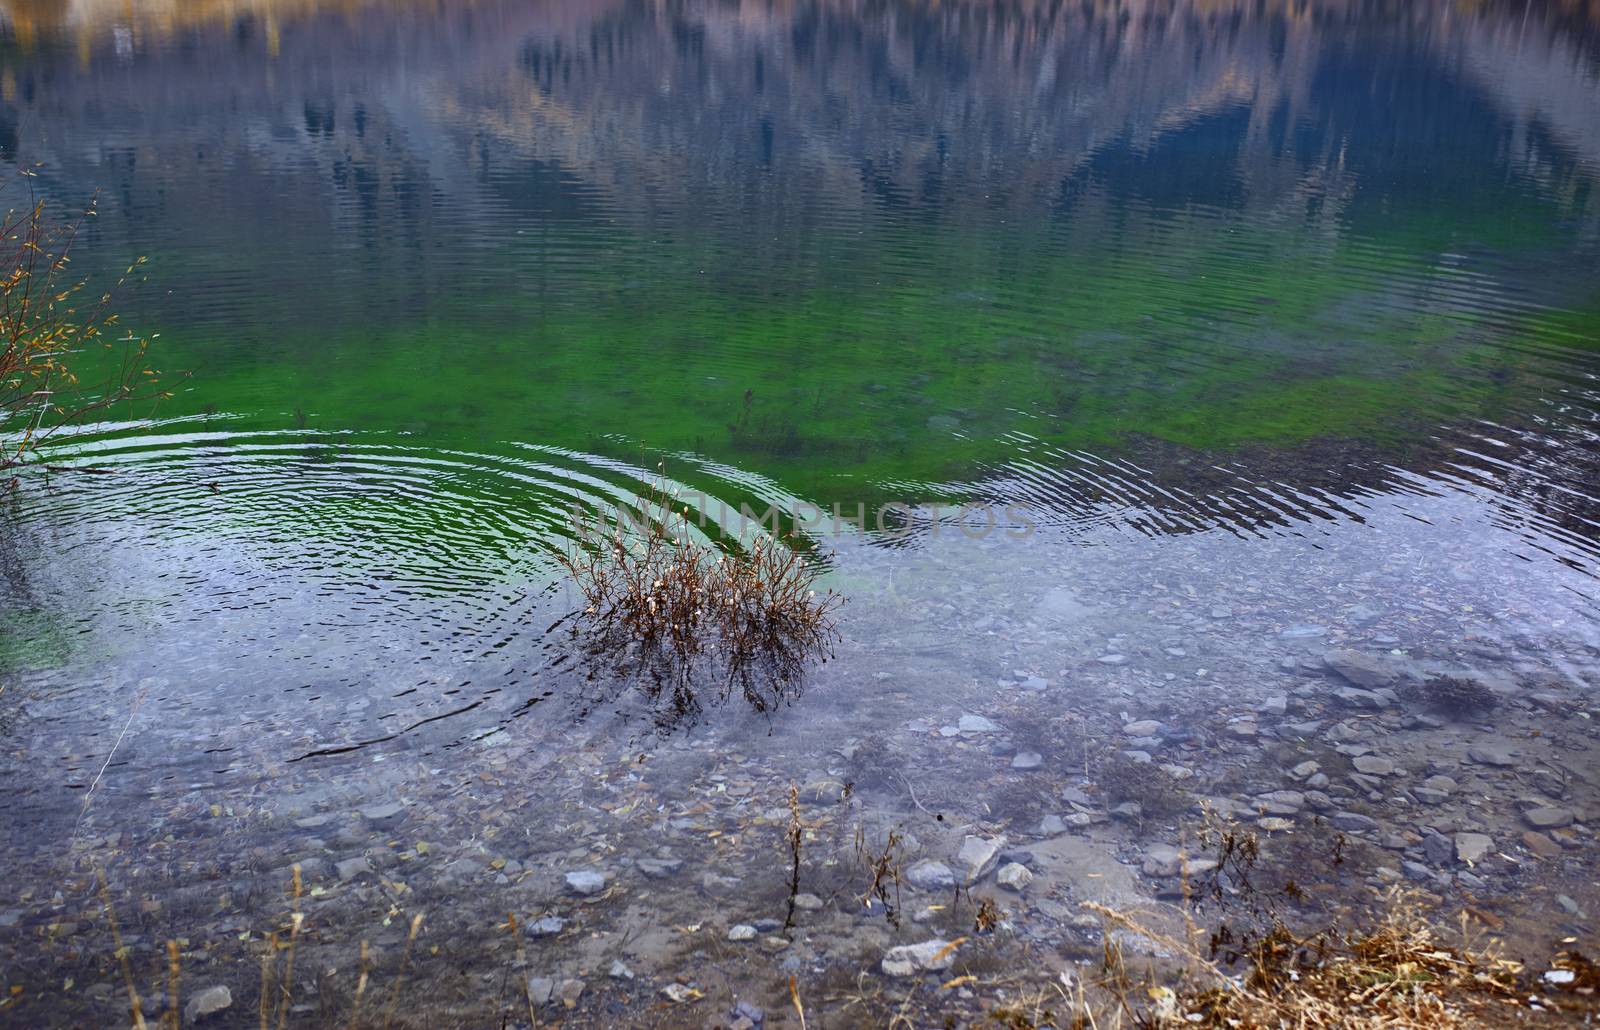 Ripples on the water in mountain lake by Novic